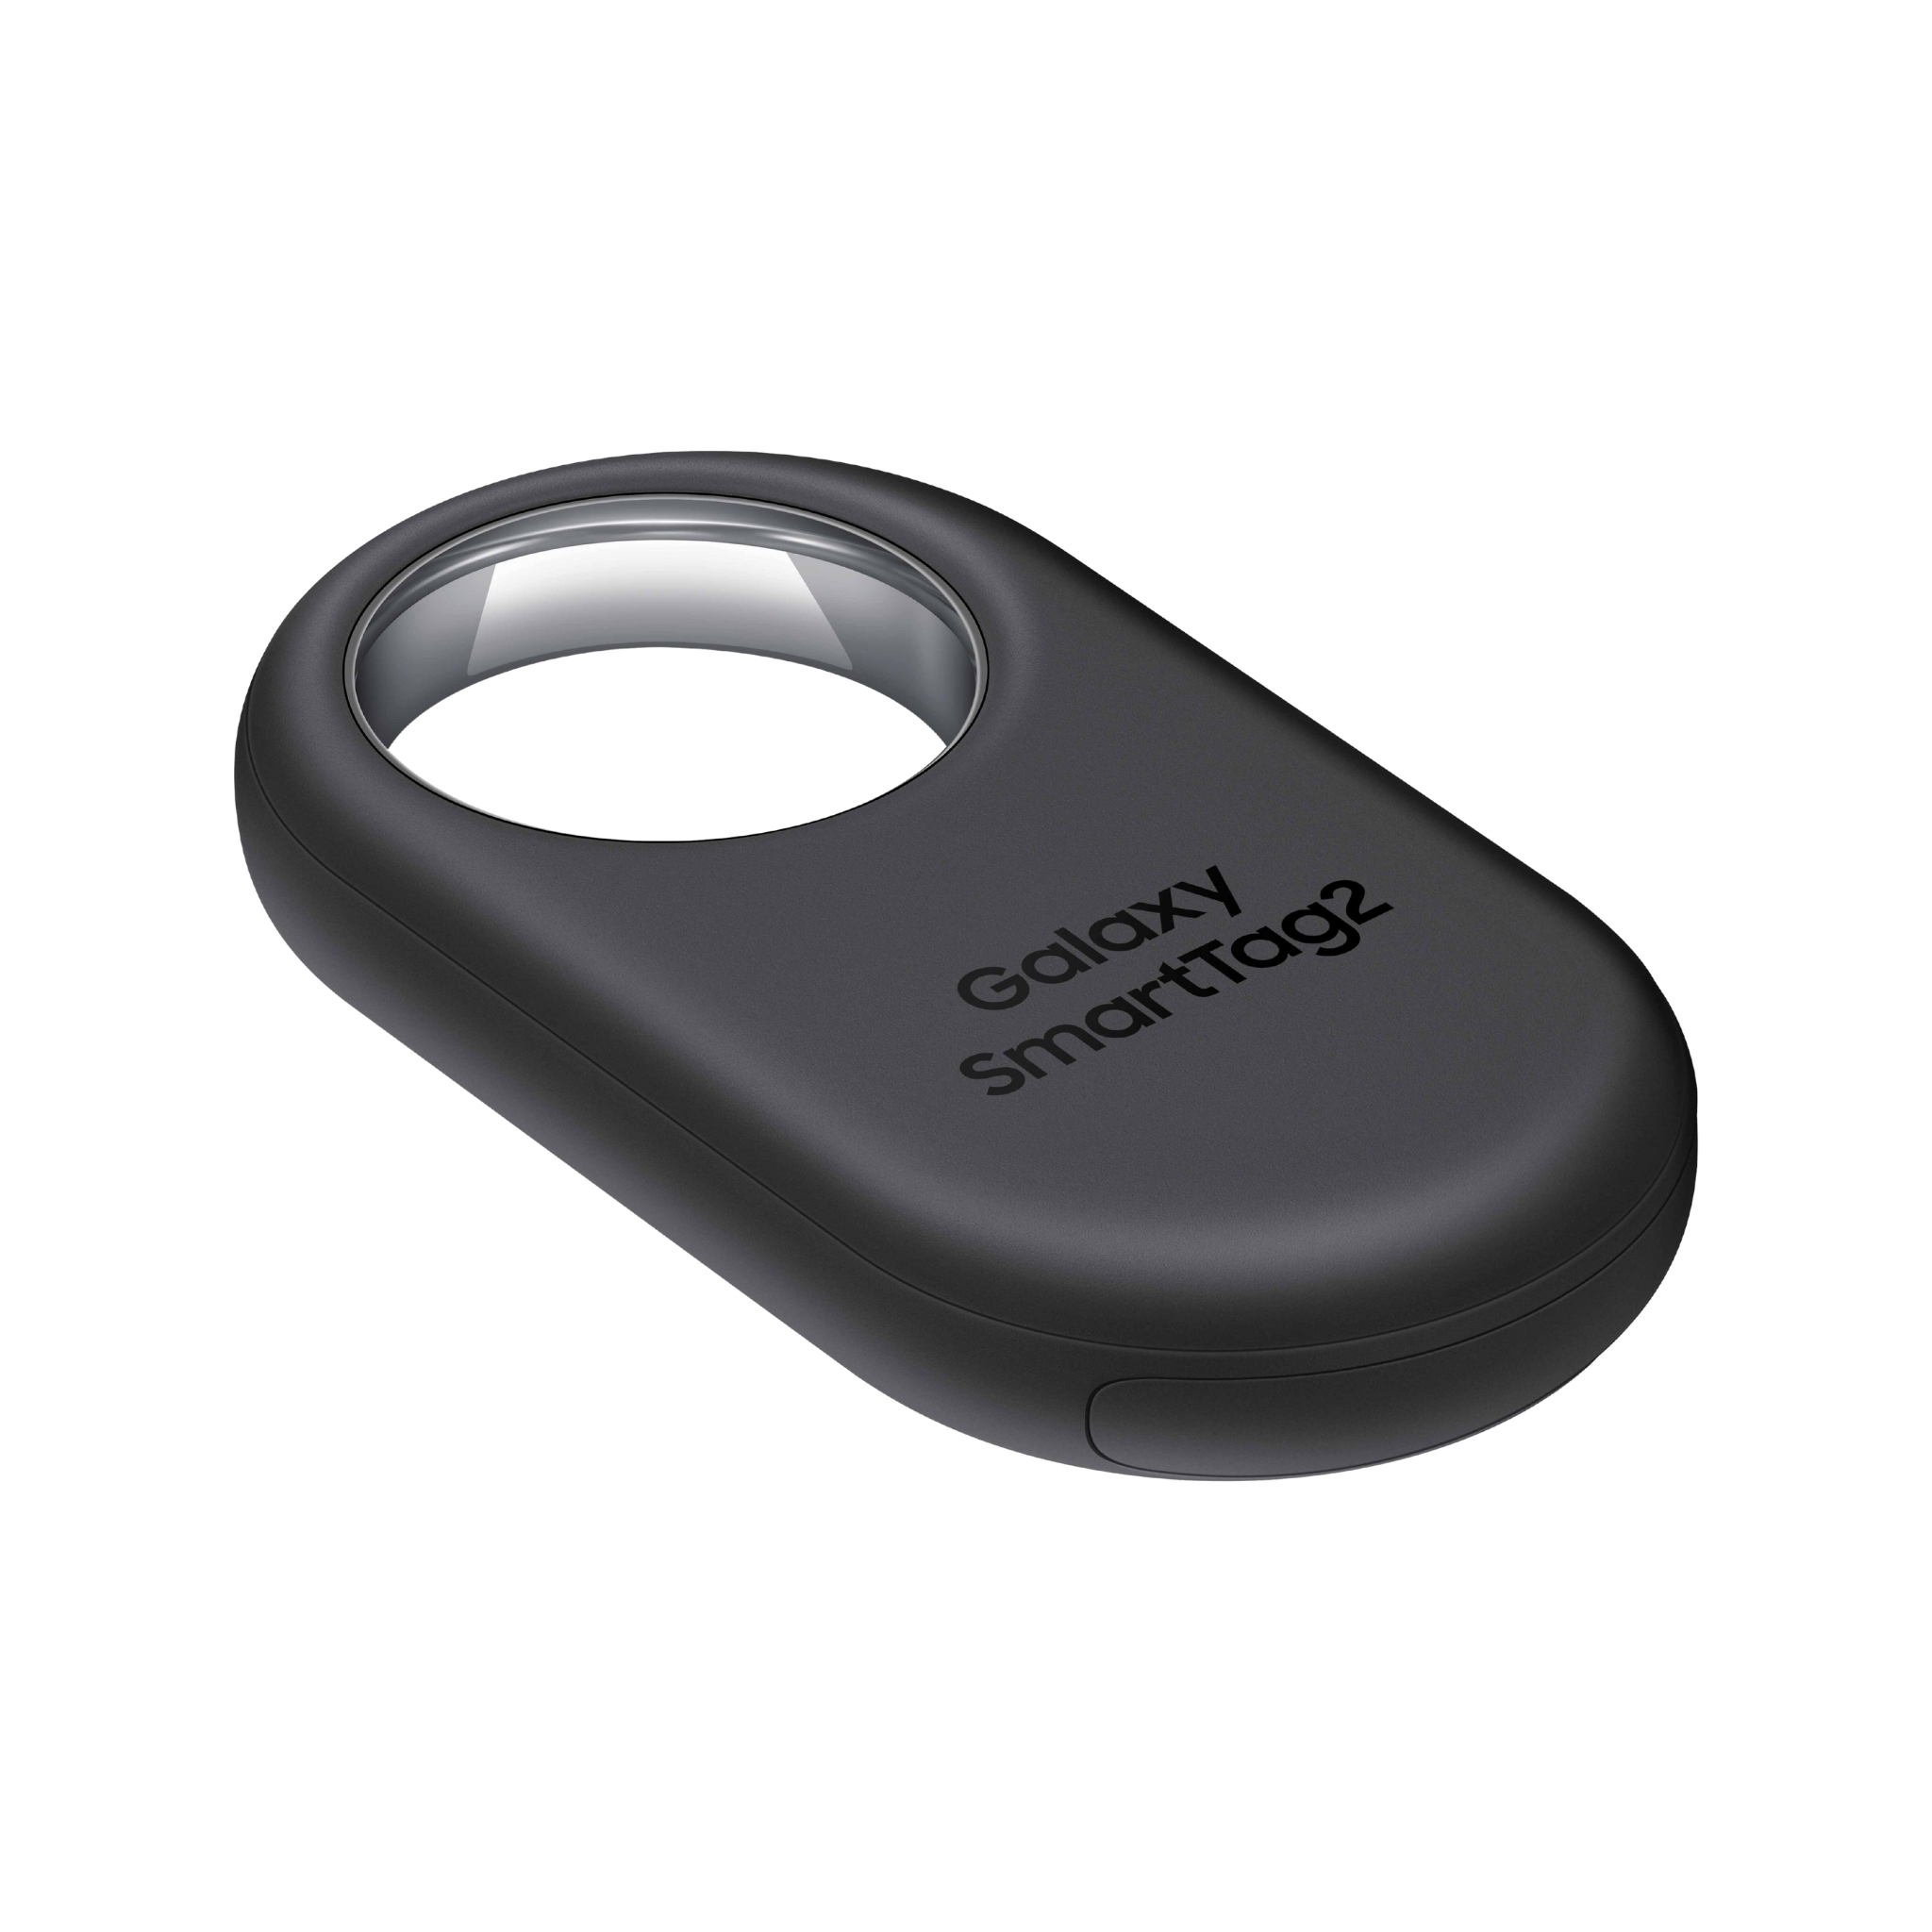 Samsung Galaxy Smart Tag 2 gets new design, UWB - Android Authority